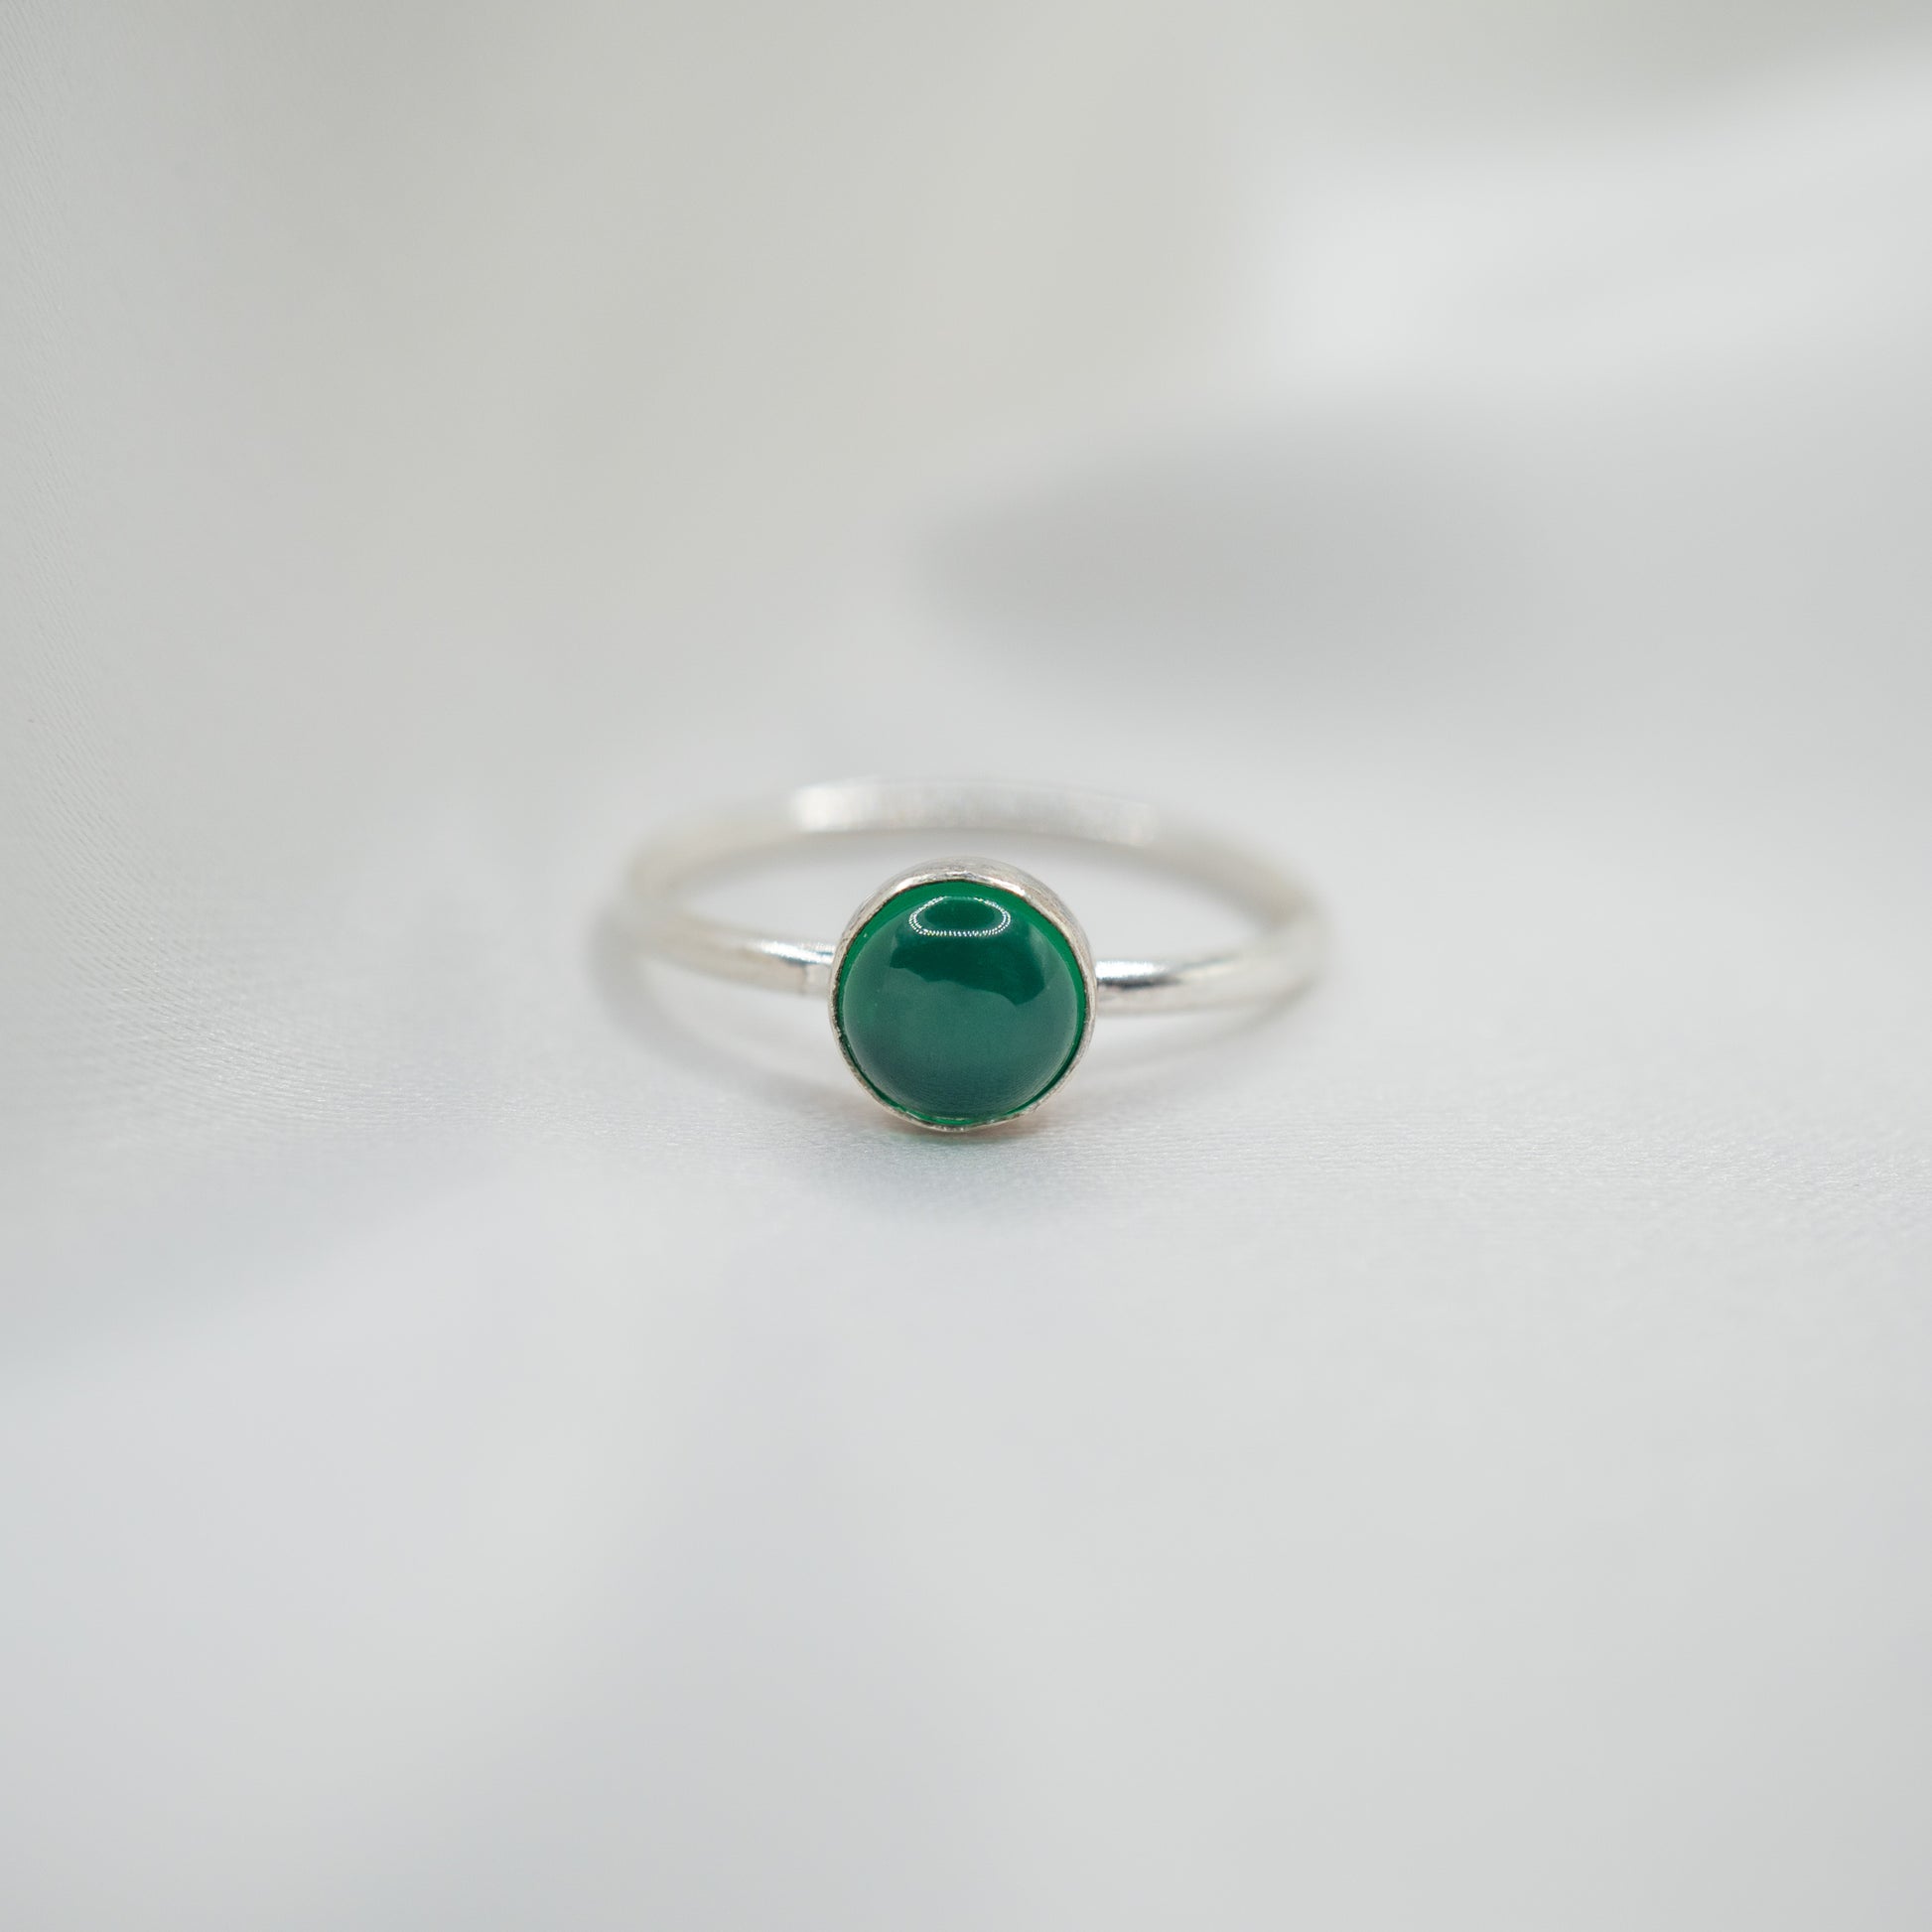 Sterling Silver Green Onyx Cabochon Ring - shot on white - front view